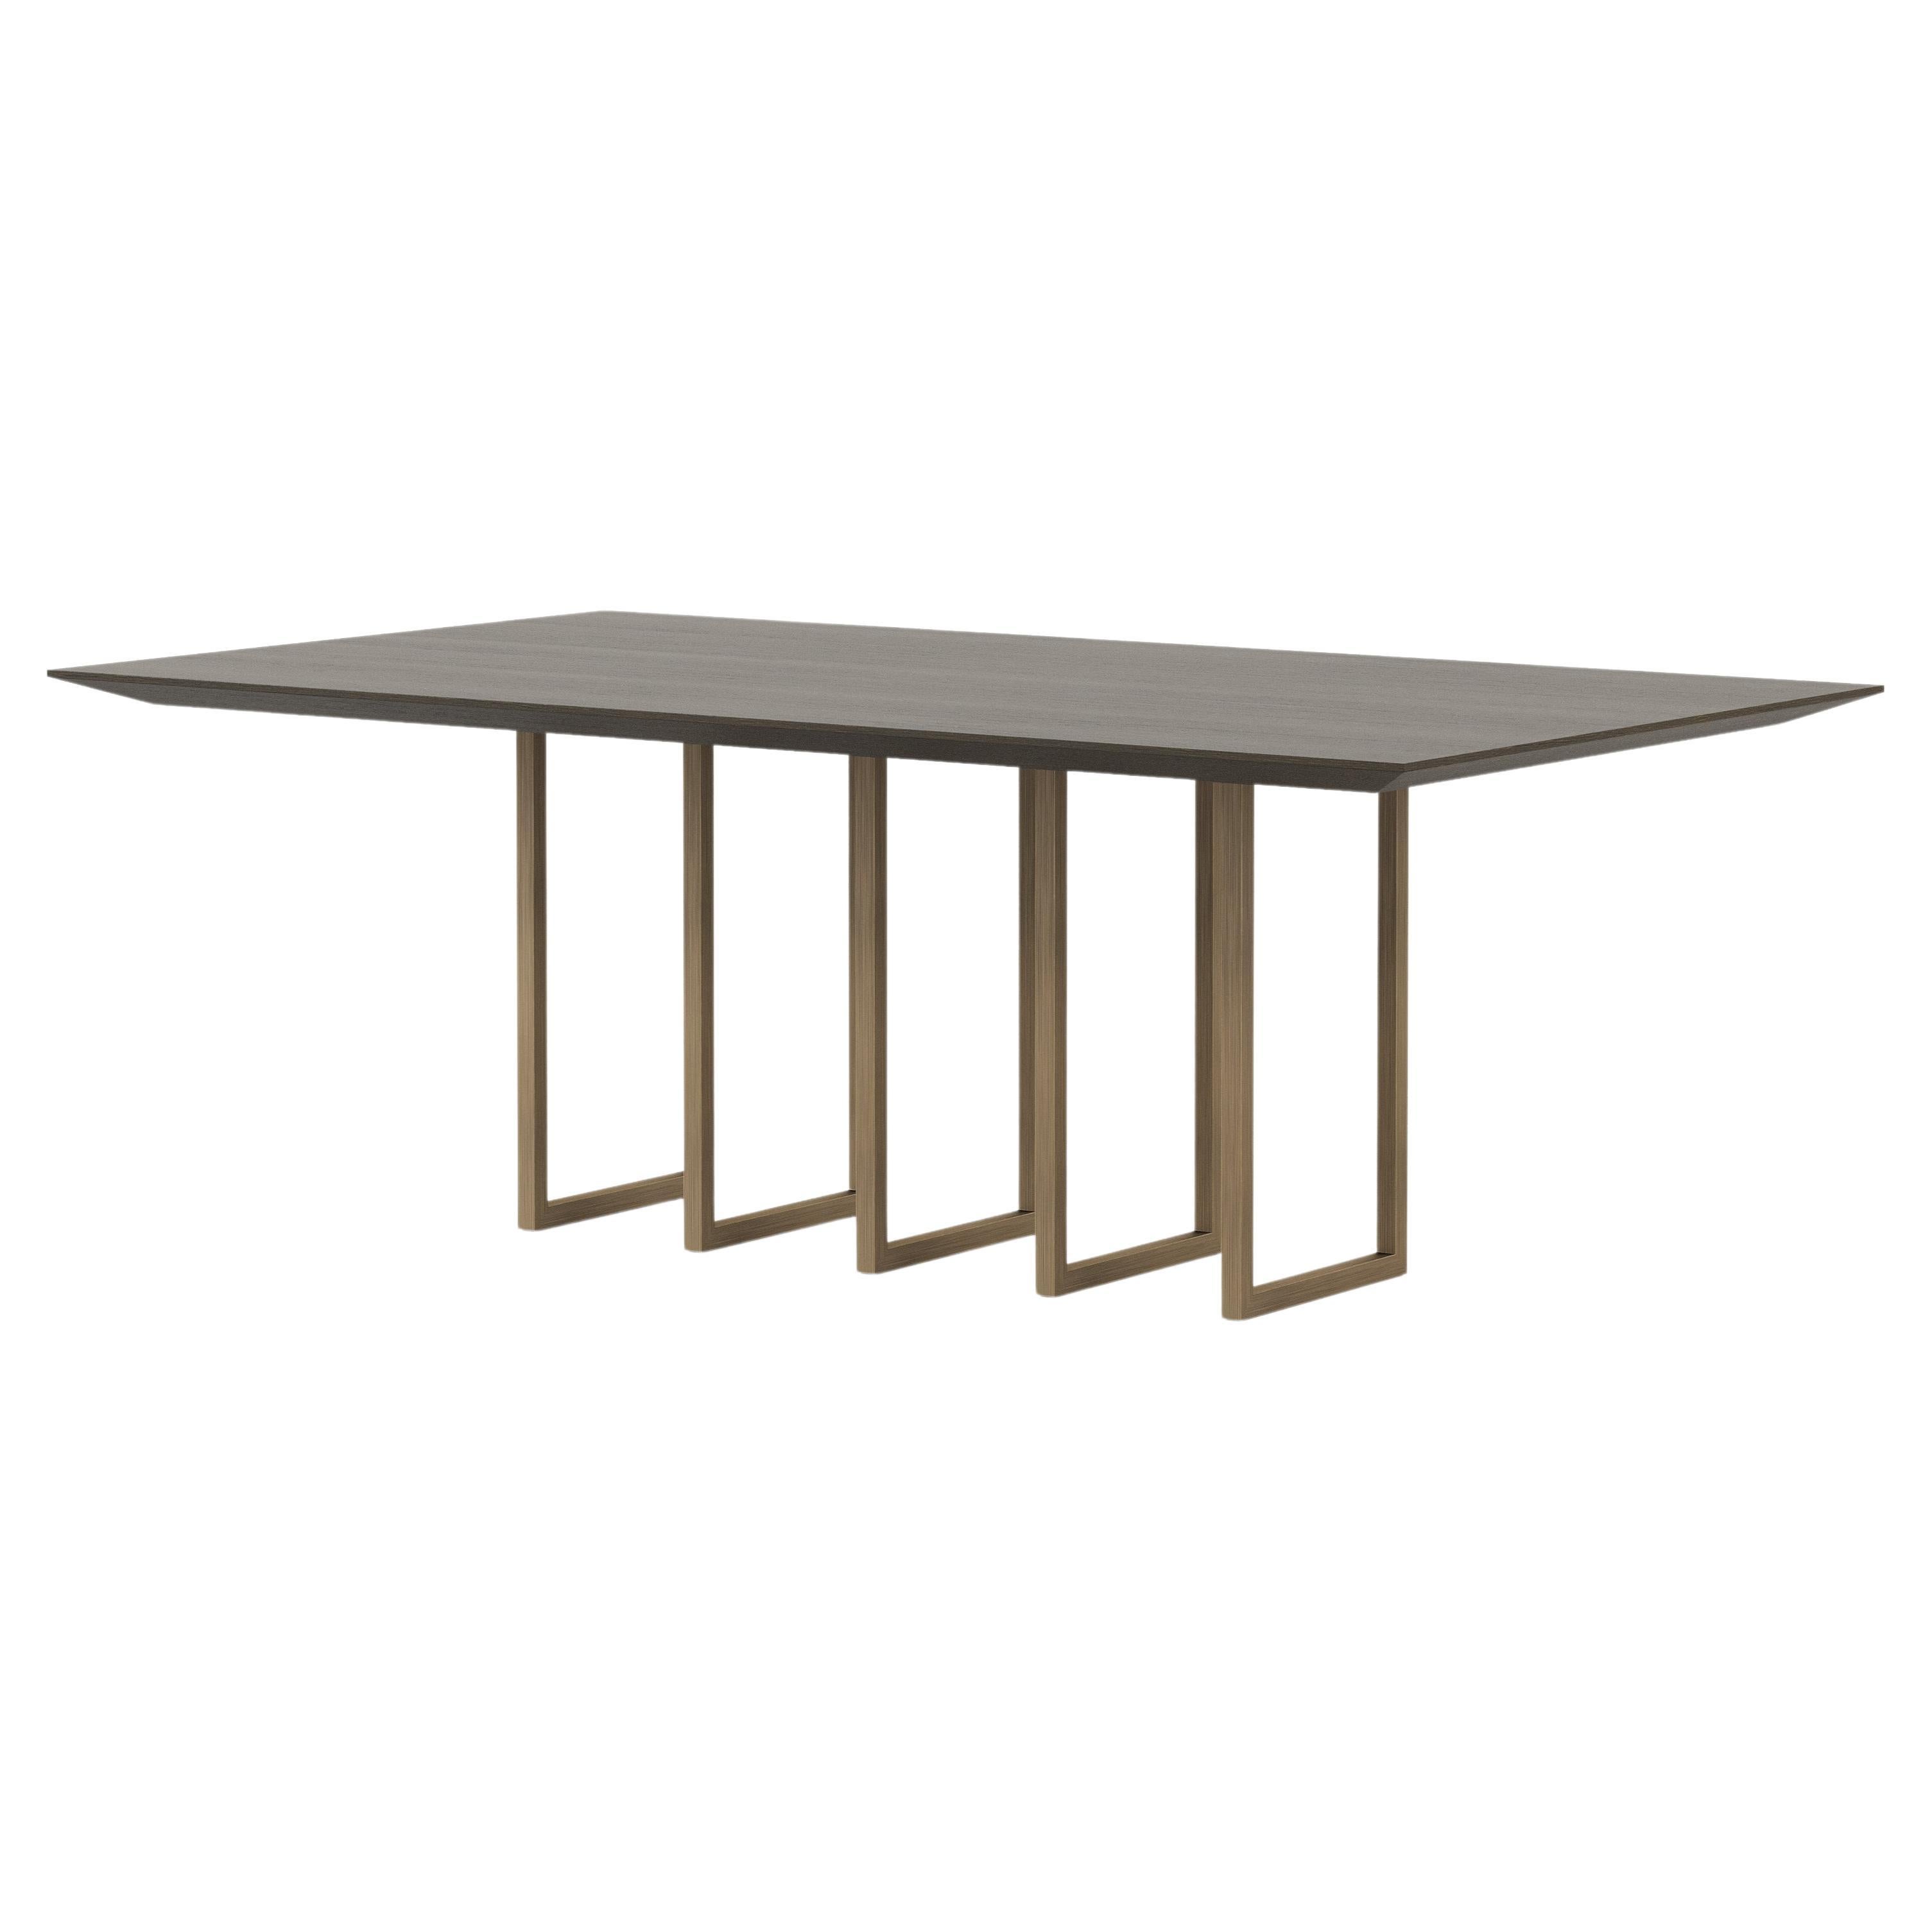 Modern Slender Dining Table Made with Walnut and Iron, Handmade by Stylish Club For Sale